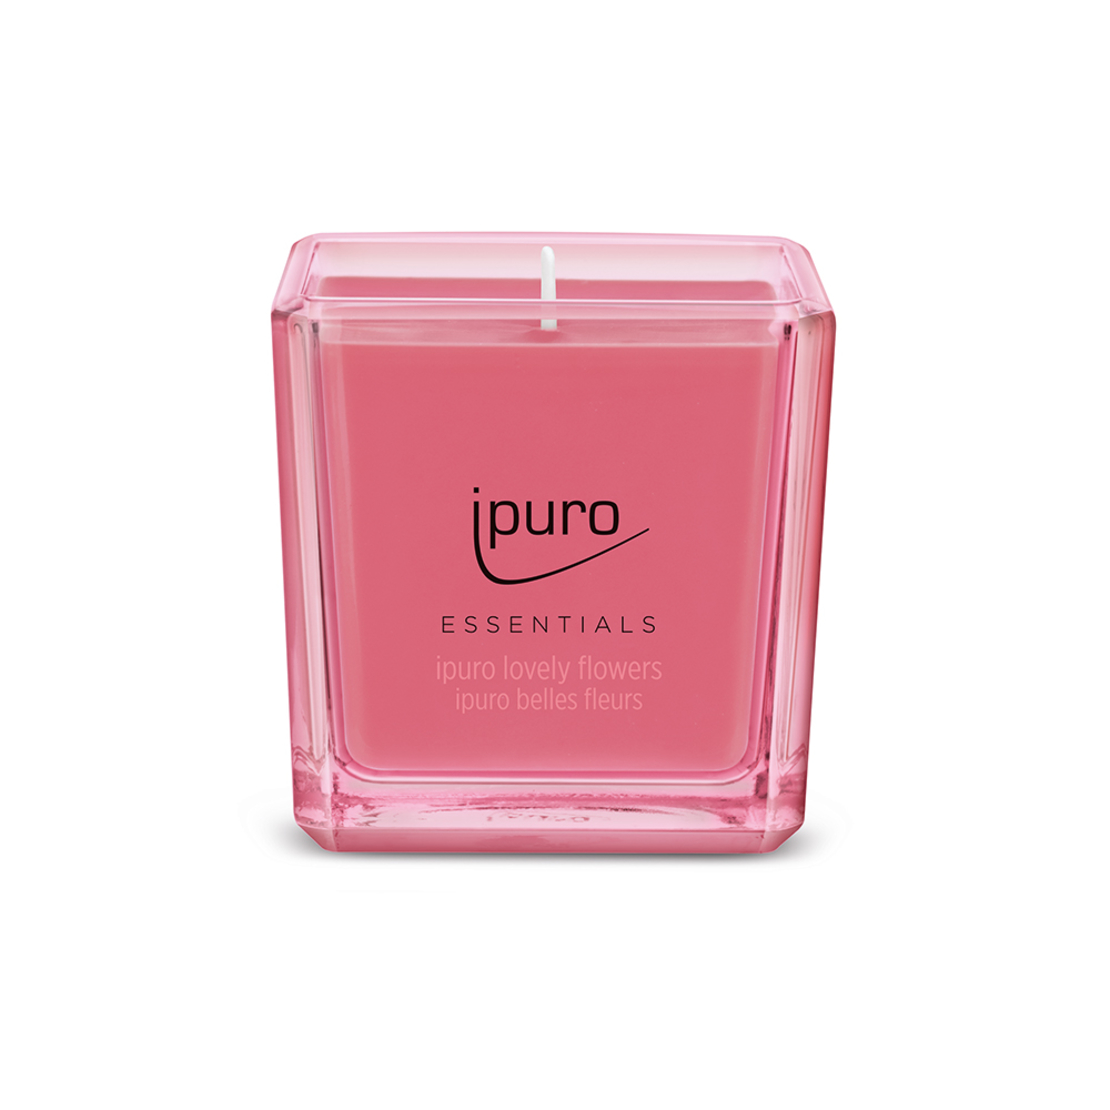 IPURO ESSENTIALS LOVELY FLOWERS CANDLE 125gr